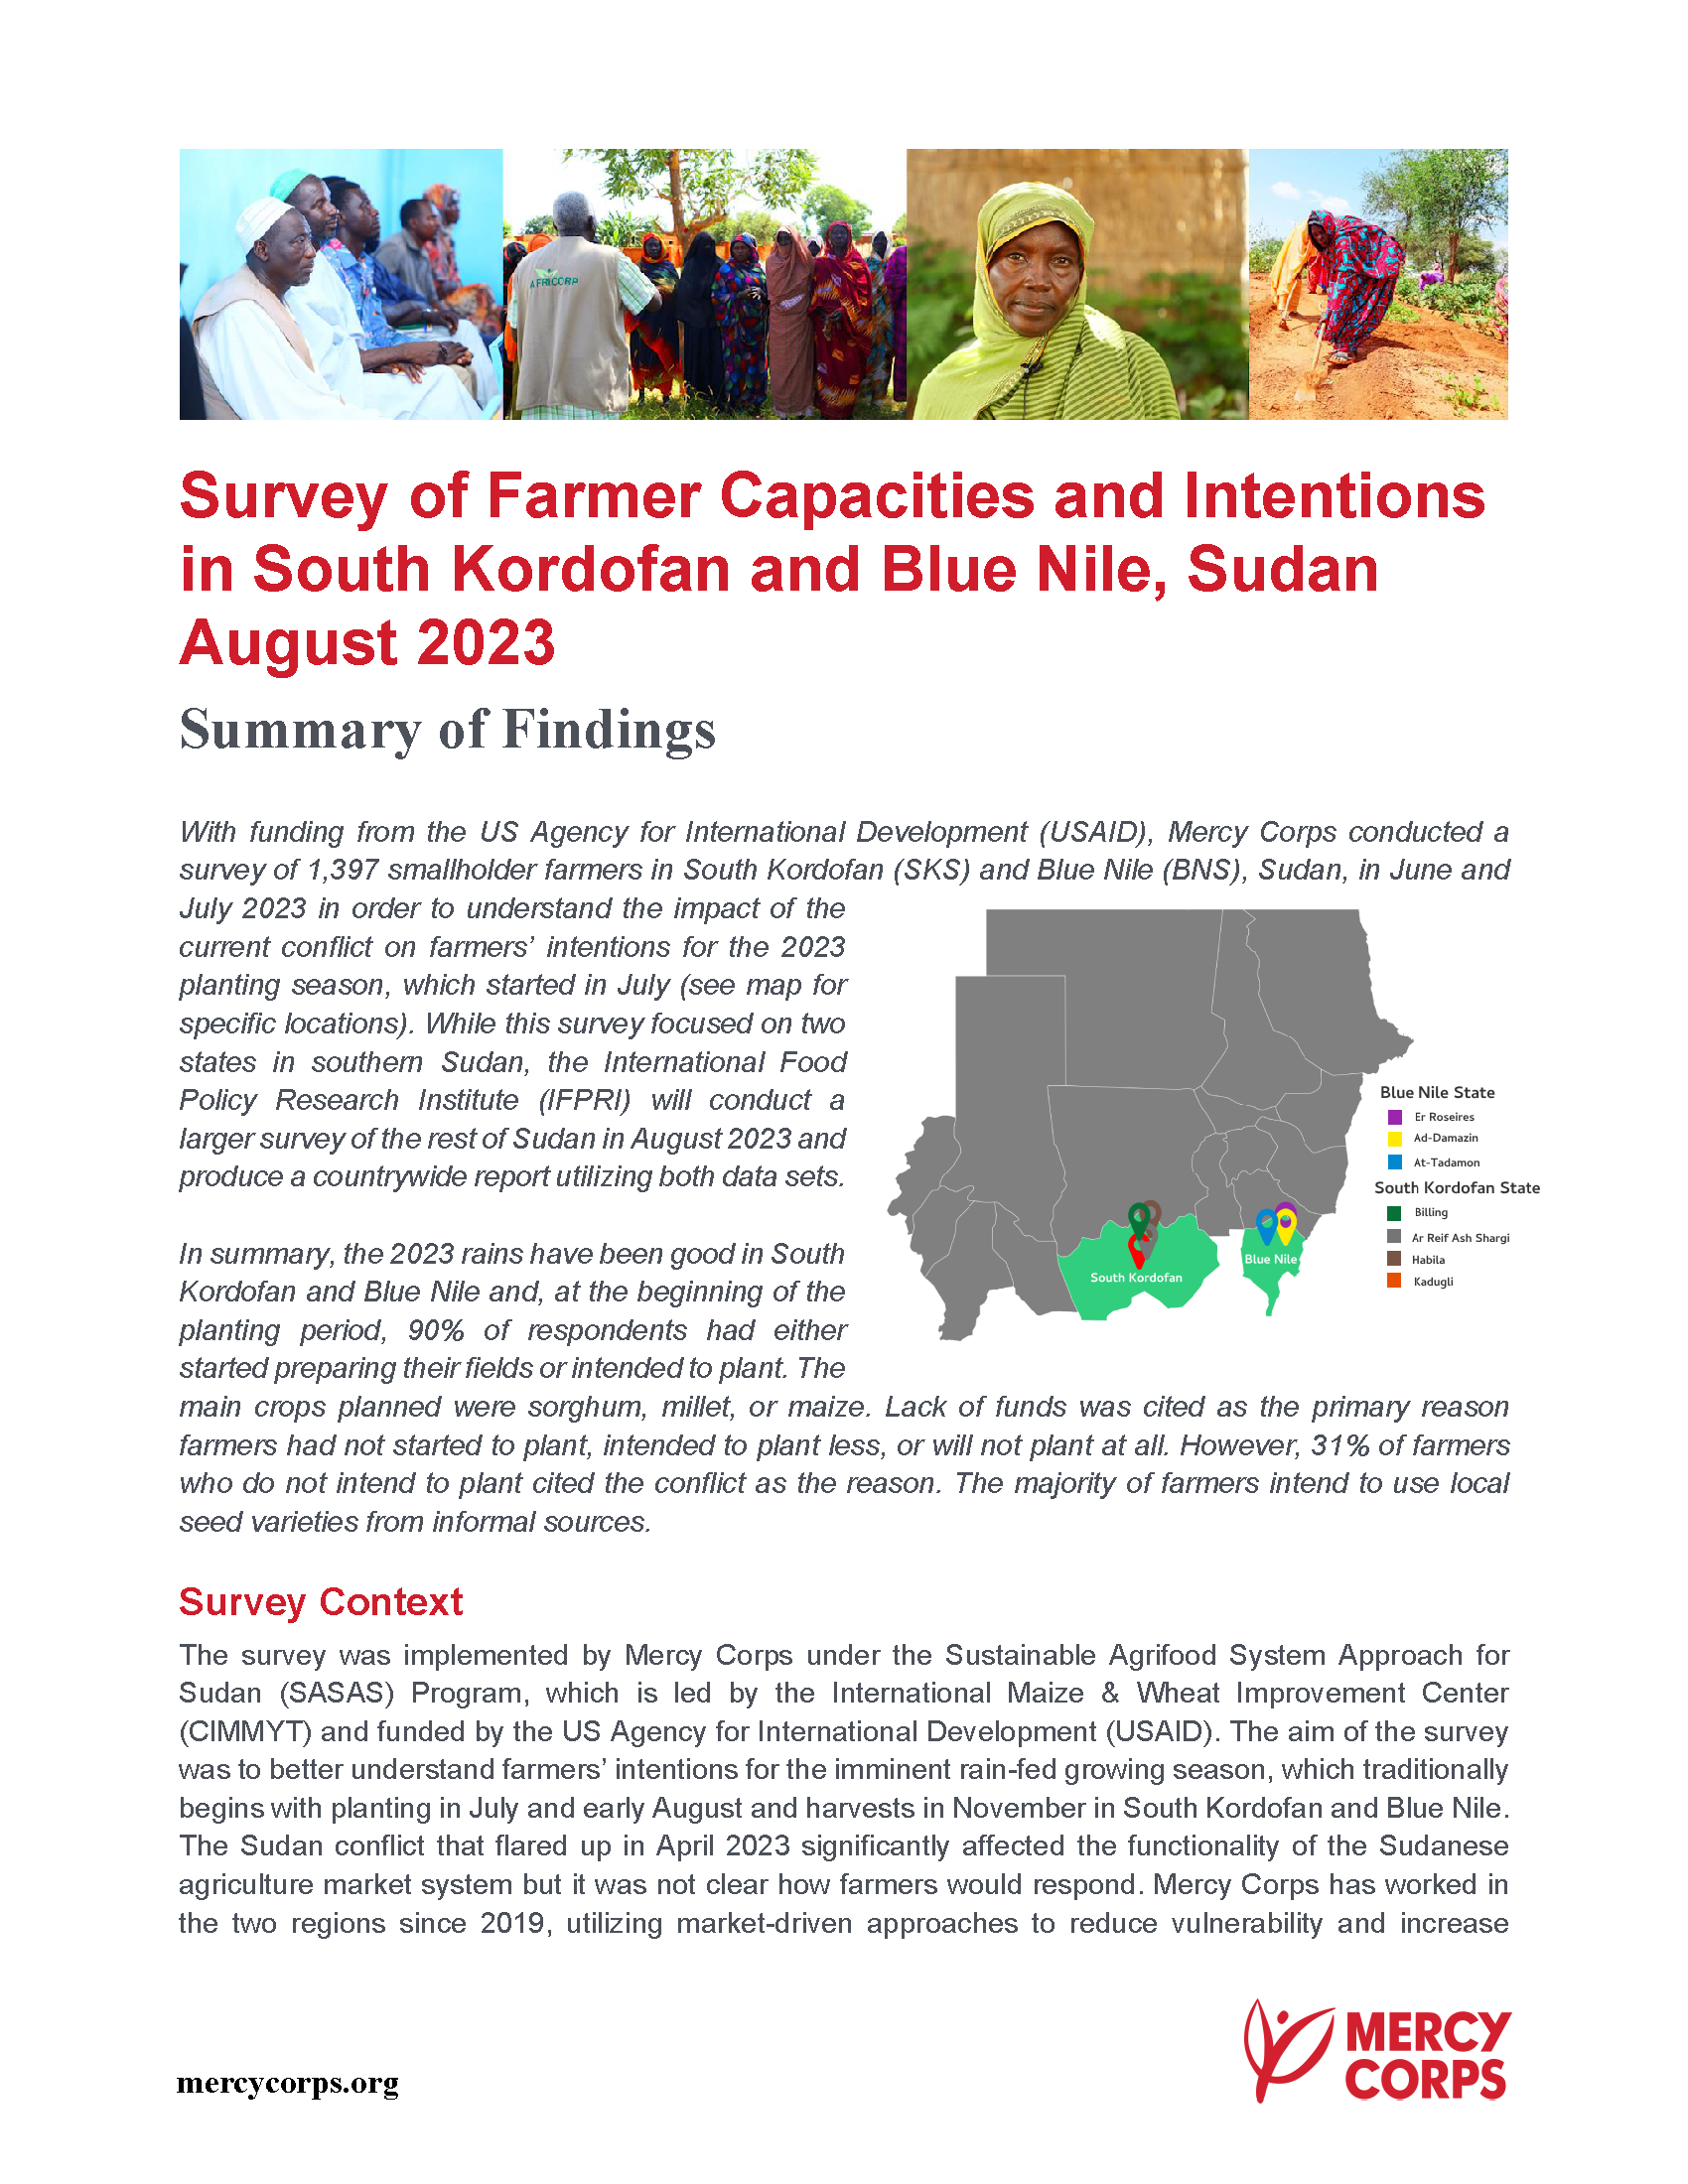 Cover page for Survey of Farmer Capacities and Intentions in South Kordofan and Blue Nile, Sudan August 2023